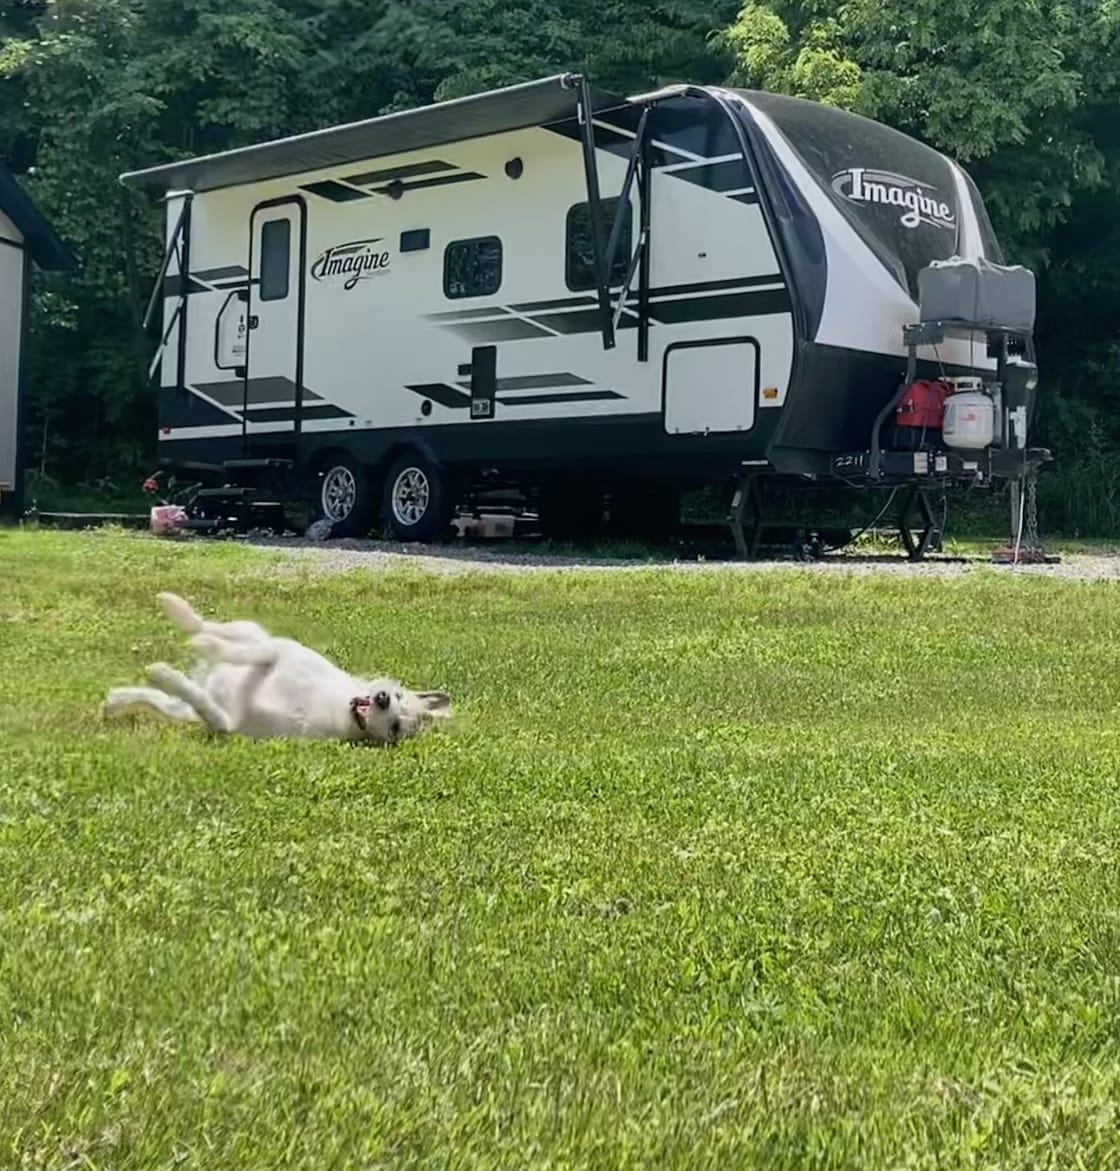 Just a happy dog in love with our campsite at Creekside